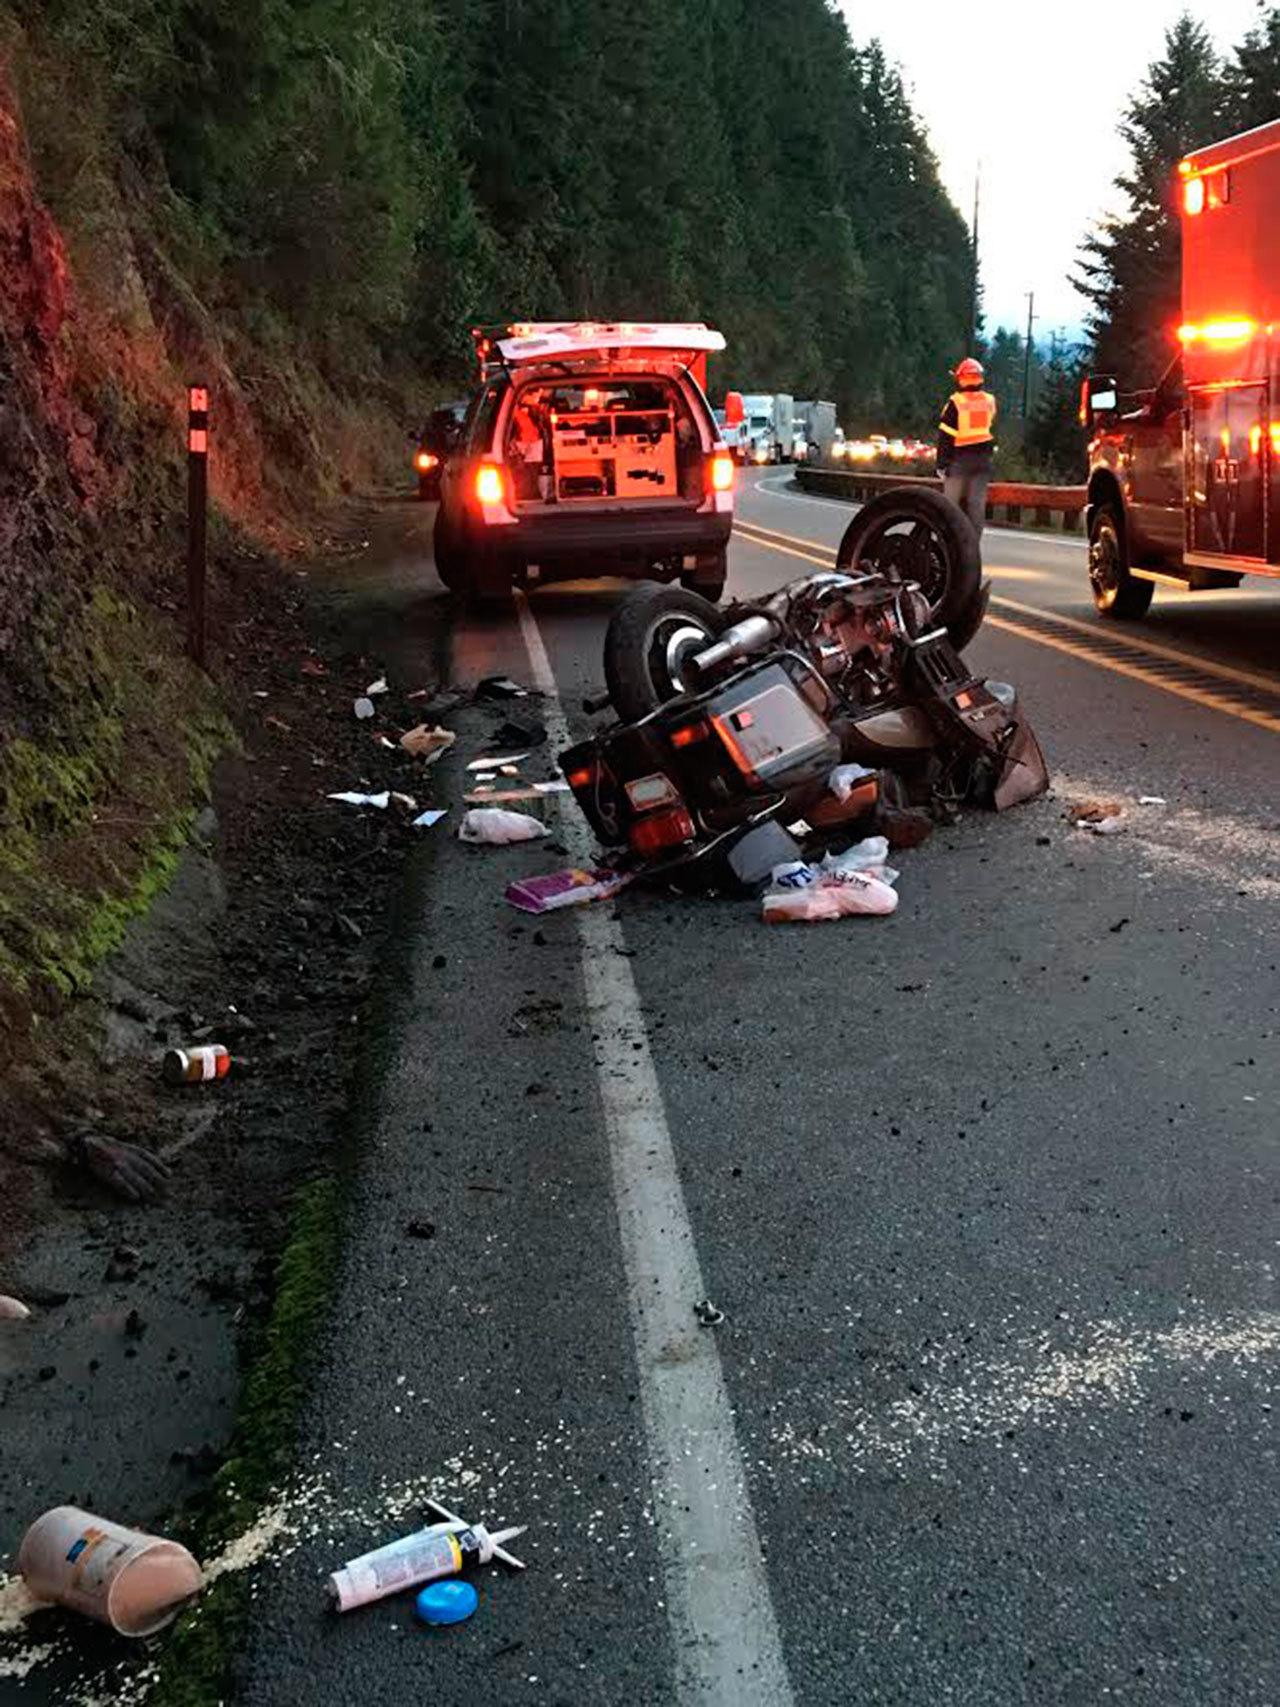 An unidentified 60-year old Las Vegas man was flown to Harborview Medical Center in Seattle in serious condition after this motorcycle wreck on state Highway 20. (East Jefferson Fire-Rescue)